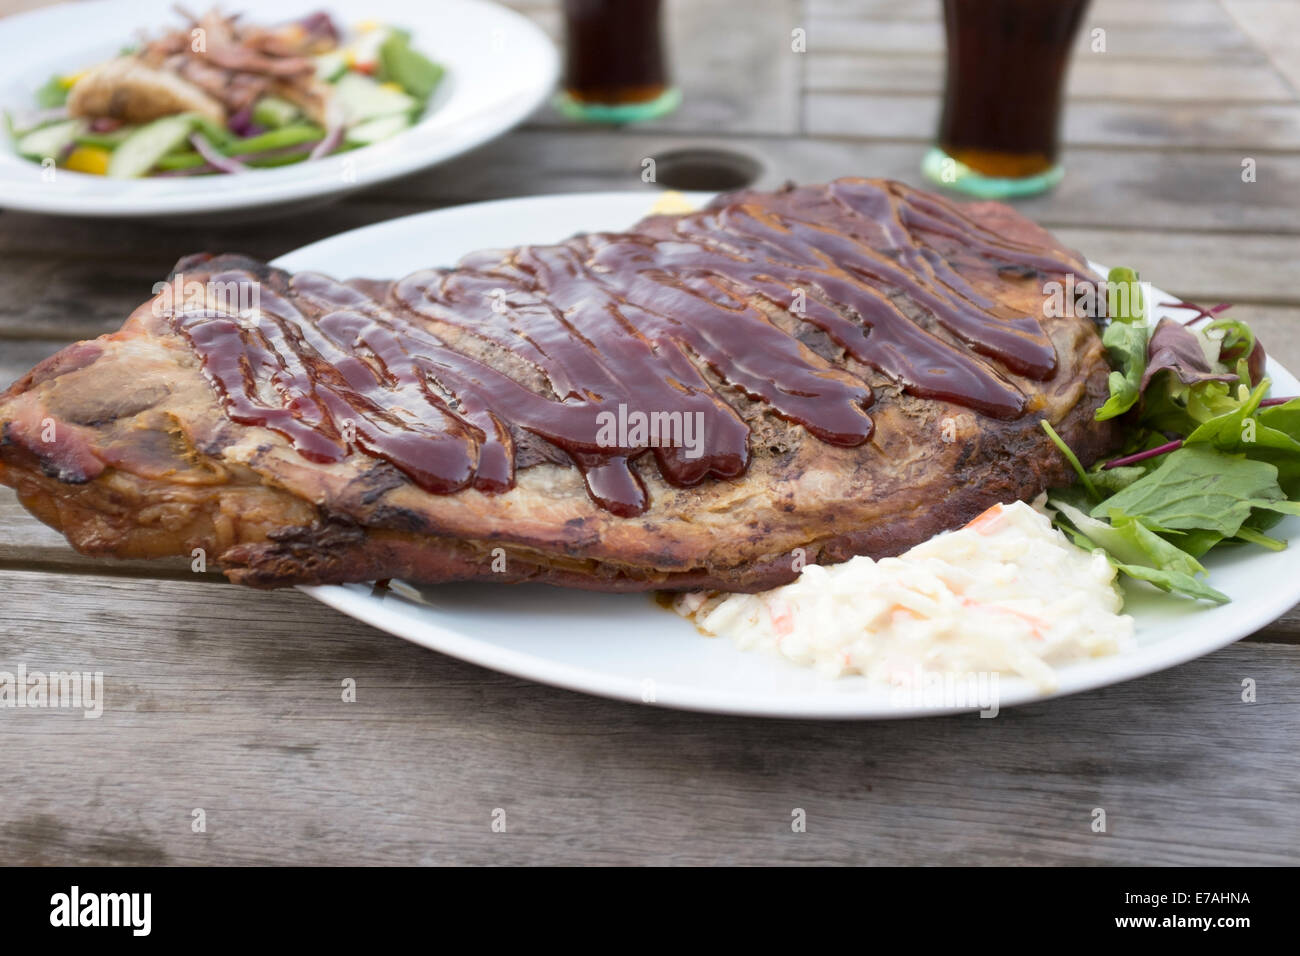 Pub Lunch Eating Out Rack of Ribs Big Appetite Stock Photo